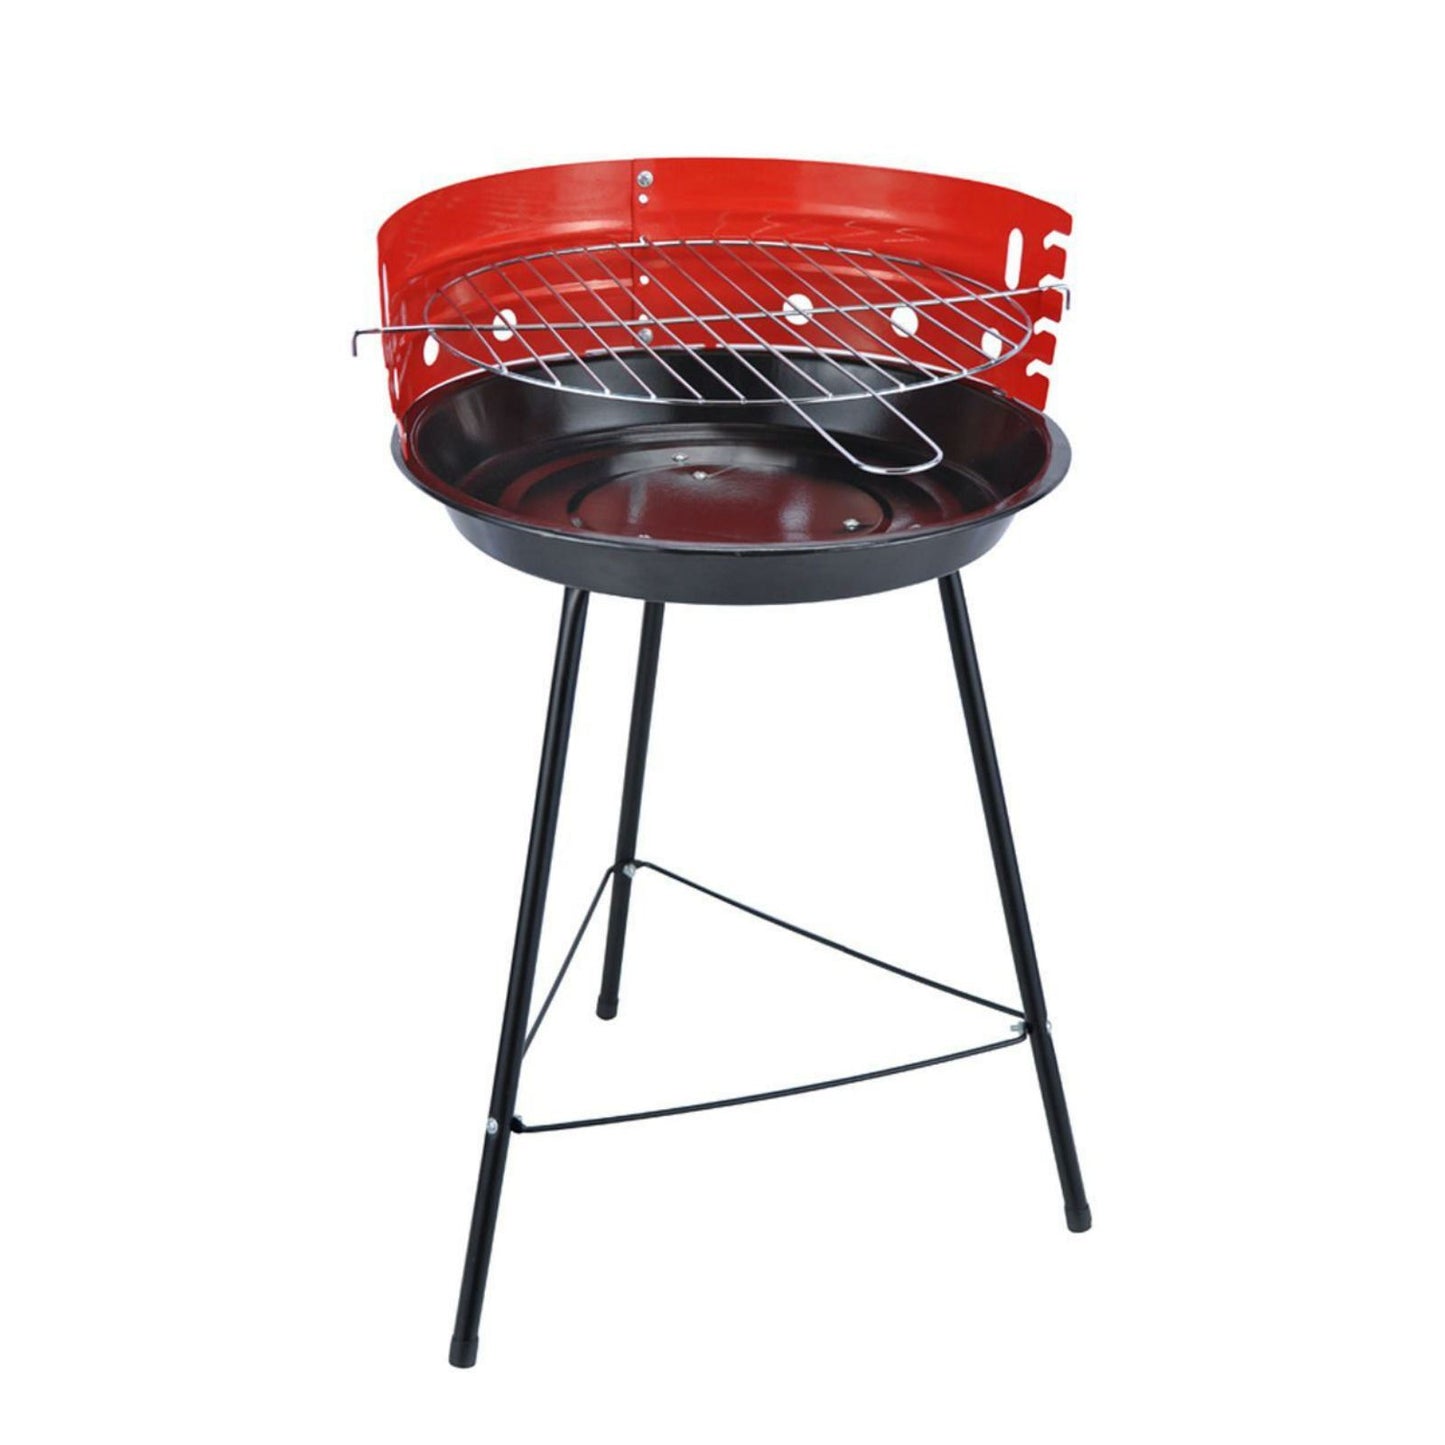 Compact 36cm Round Portable Charcoal Bbq Grill